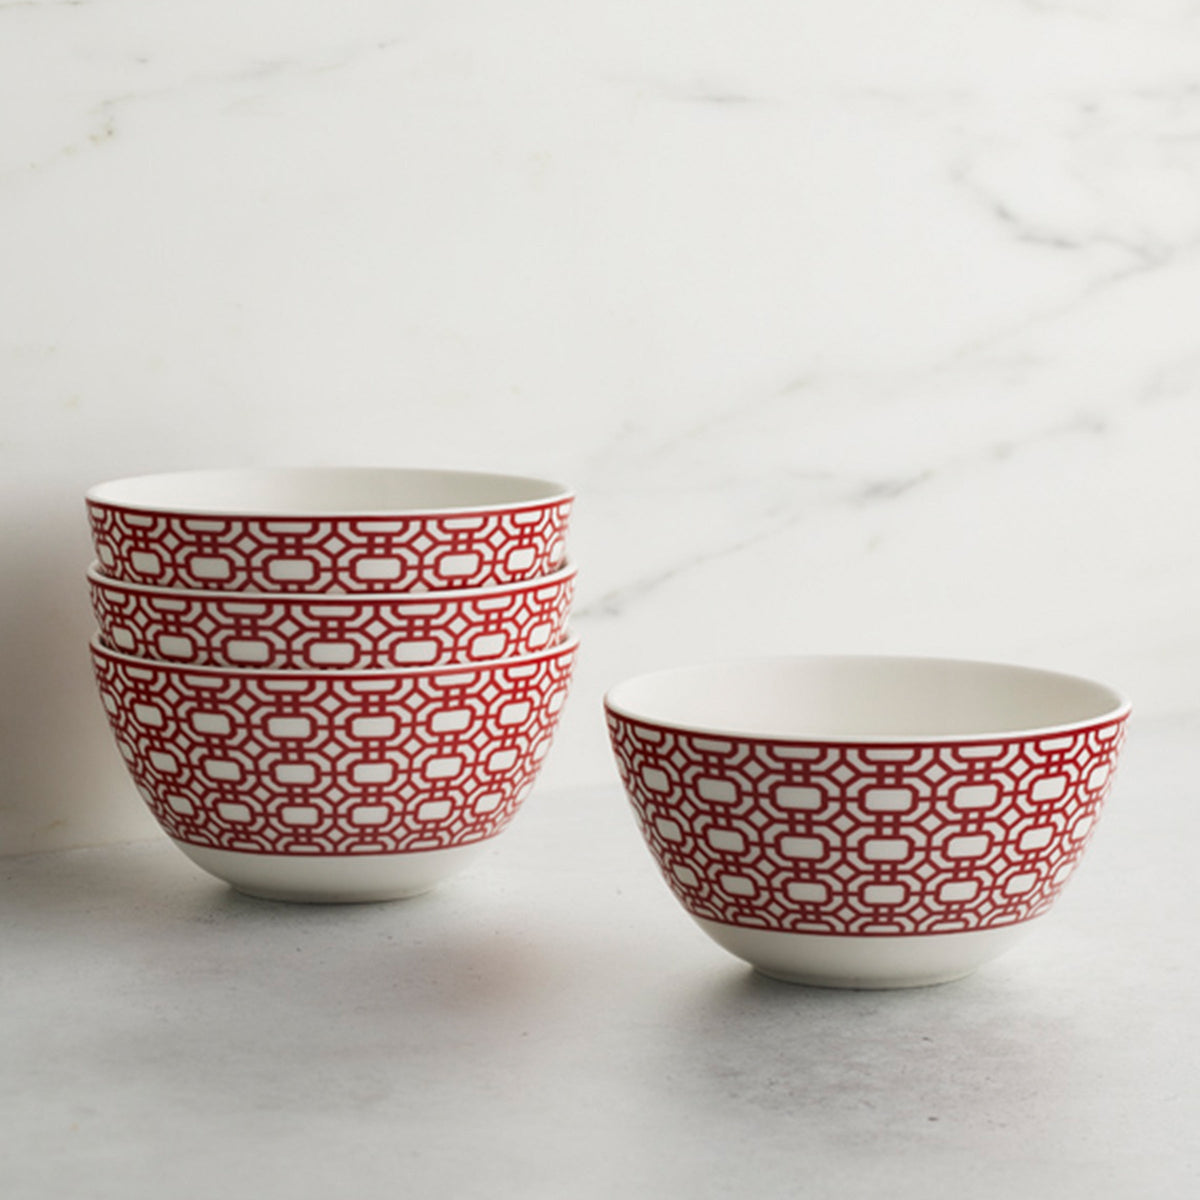 Two Newport Garden Gate Crimson Tall Cereal Bowls by Caskata on a marble surface.